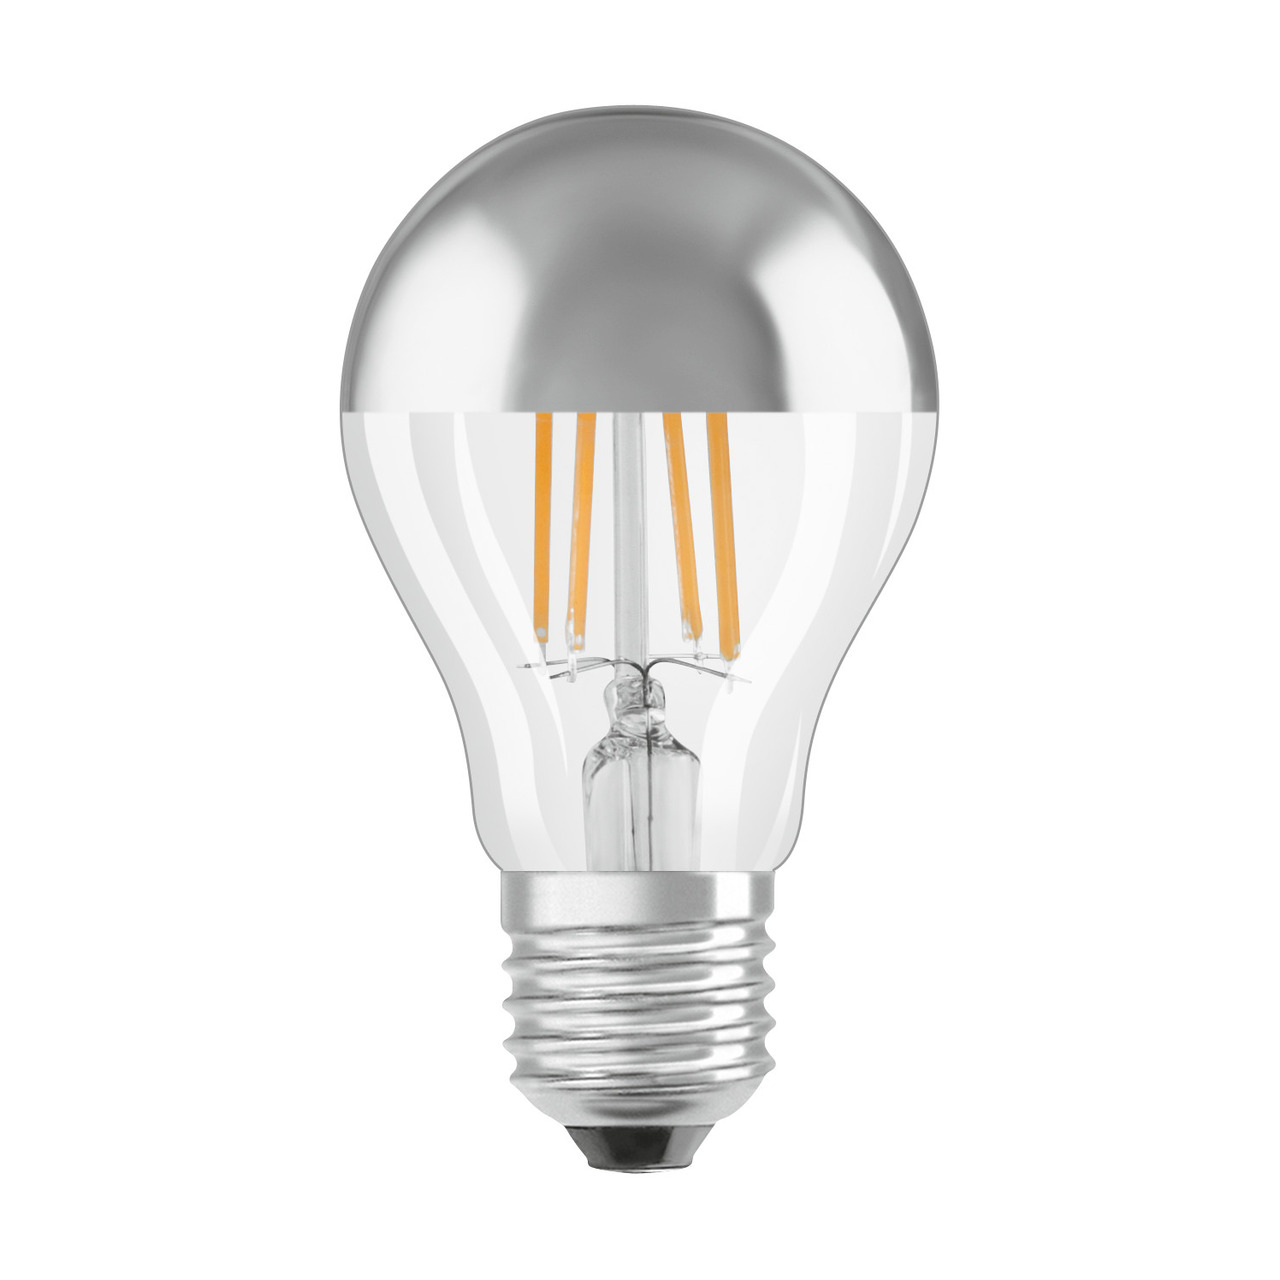 OSRAM LED Mirror Silver 4-W-Filament-LED-Lampe E27 mit Silberkuppe- 400 lm unter Beleuchtung